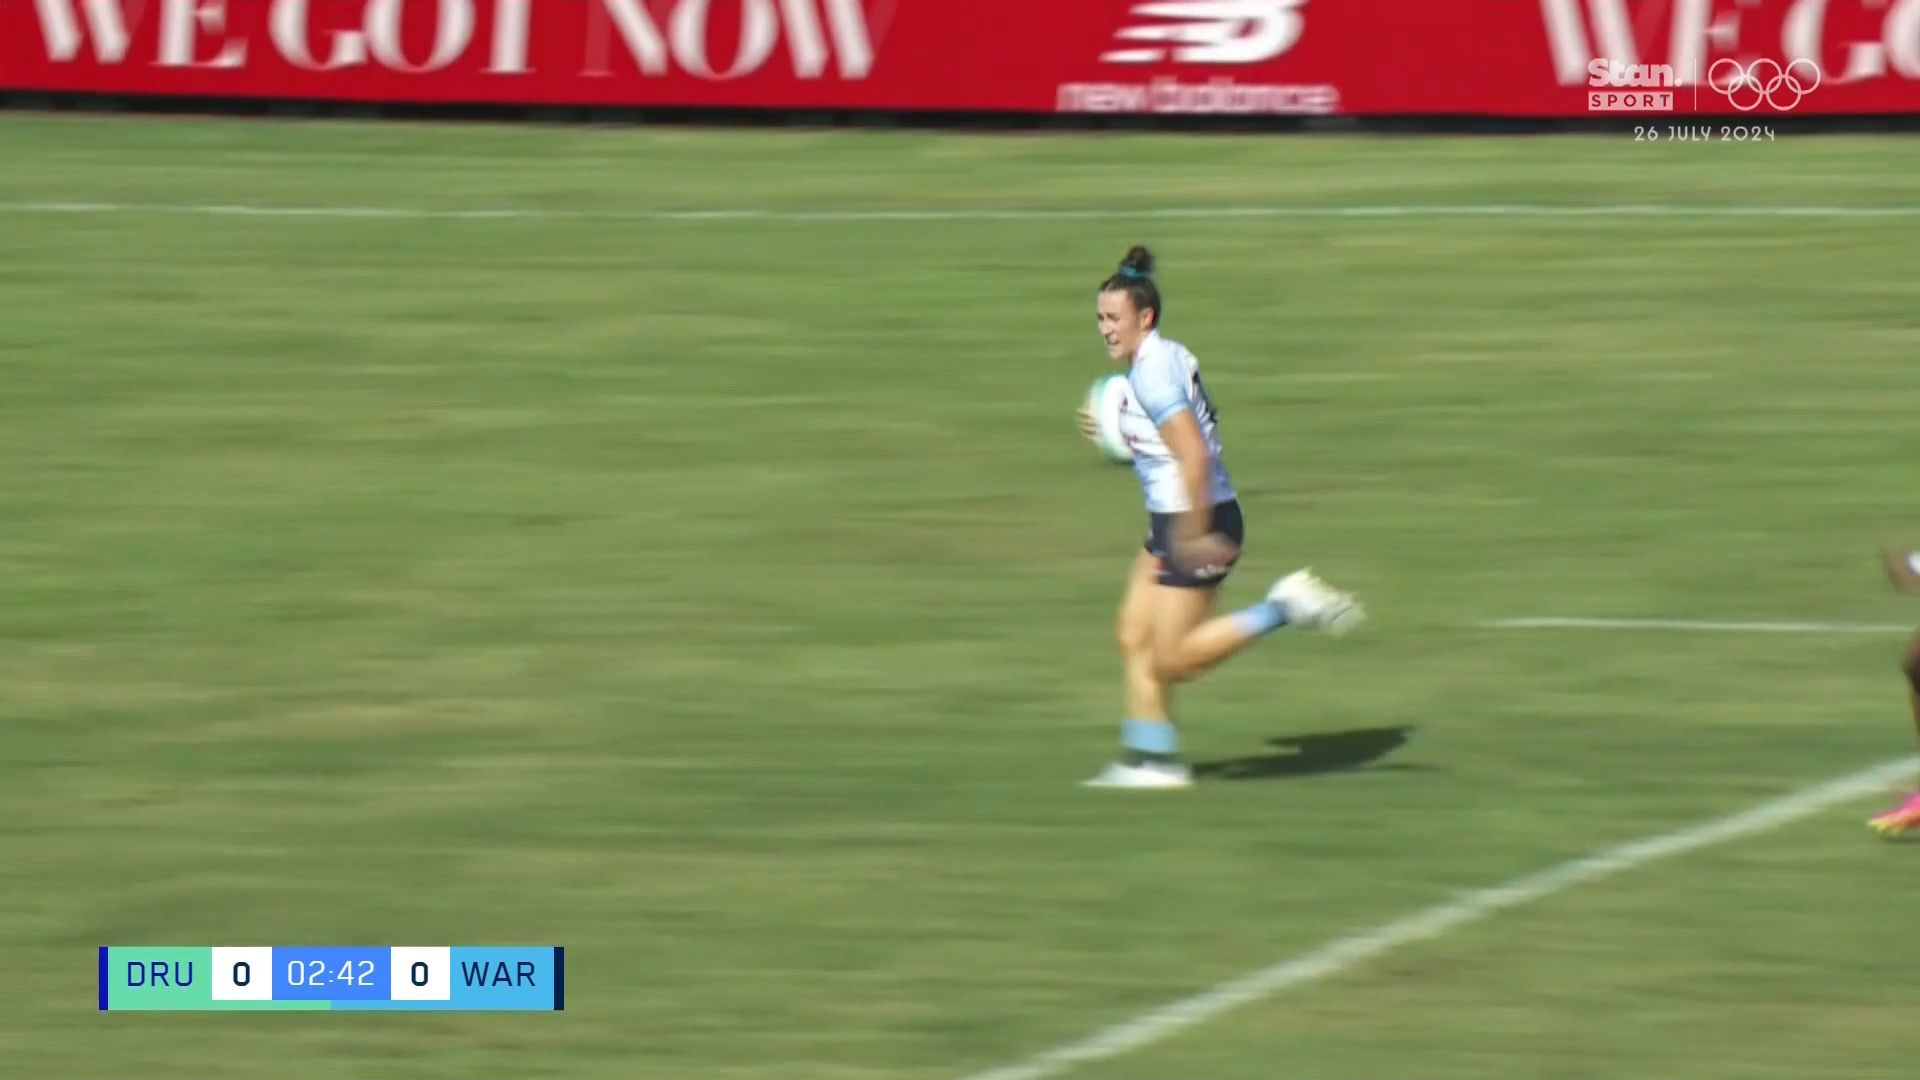 Astonishing Super Rugby Women's turnaround as Waratahs beat defending champions by 41 points